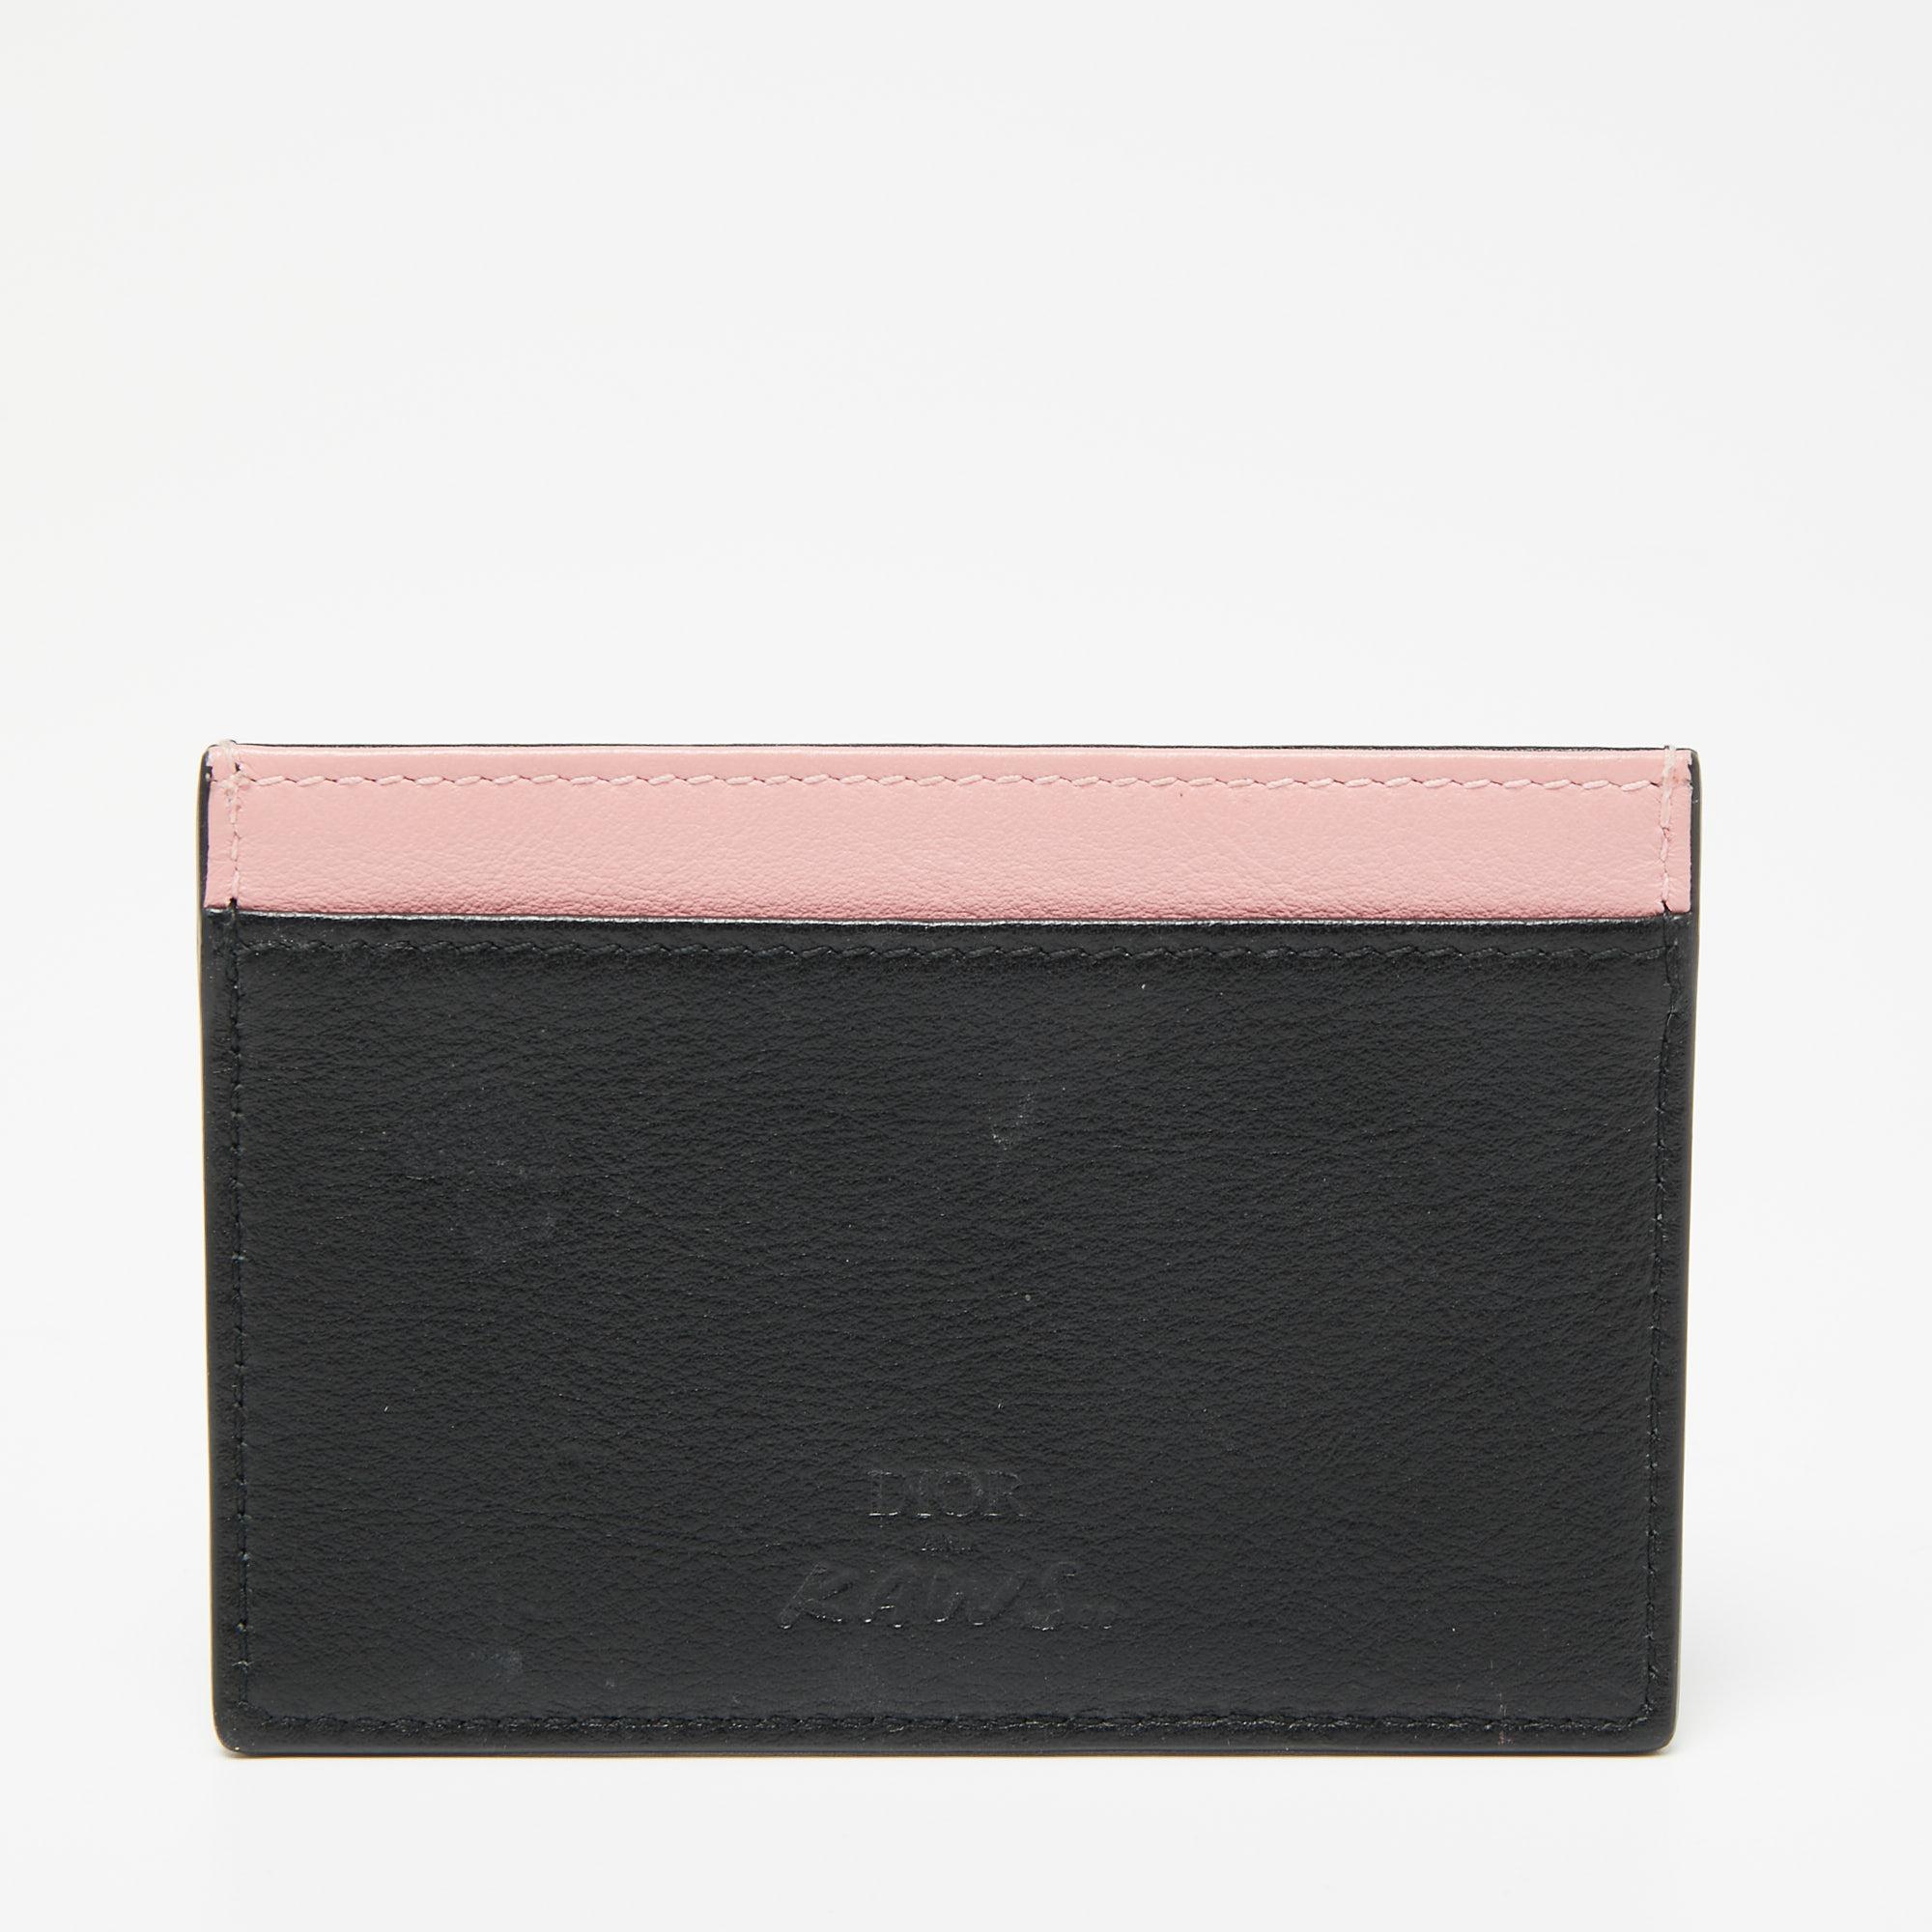 Stacked with bee detailing and crafted into a sturdy shape, this Dior x Kaws cardholder is a luxurious accessory you need to own today! It is made using black and pink leather and is equipped with ample slip pockets.

Includes: Original Box
